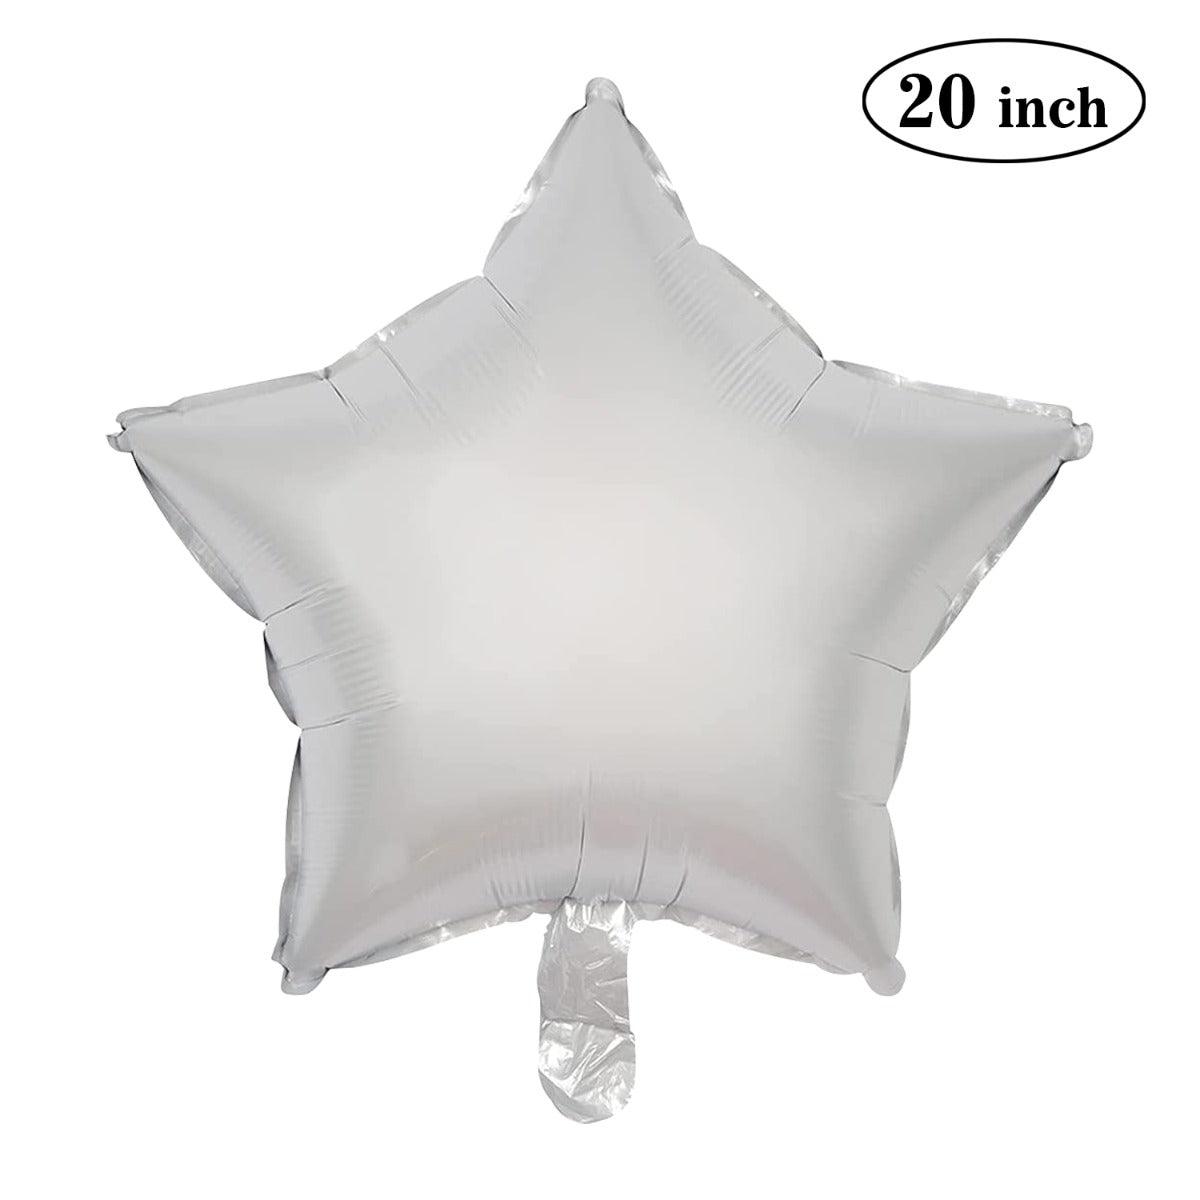 PartyCorp 20 Inch White Star Foil Balloon, 1 pc